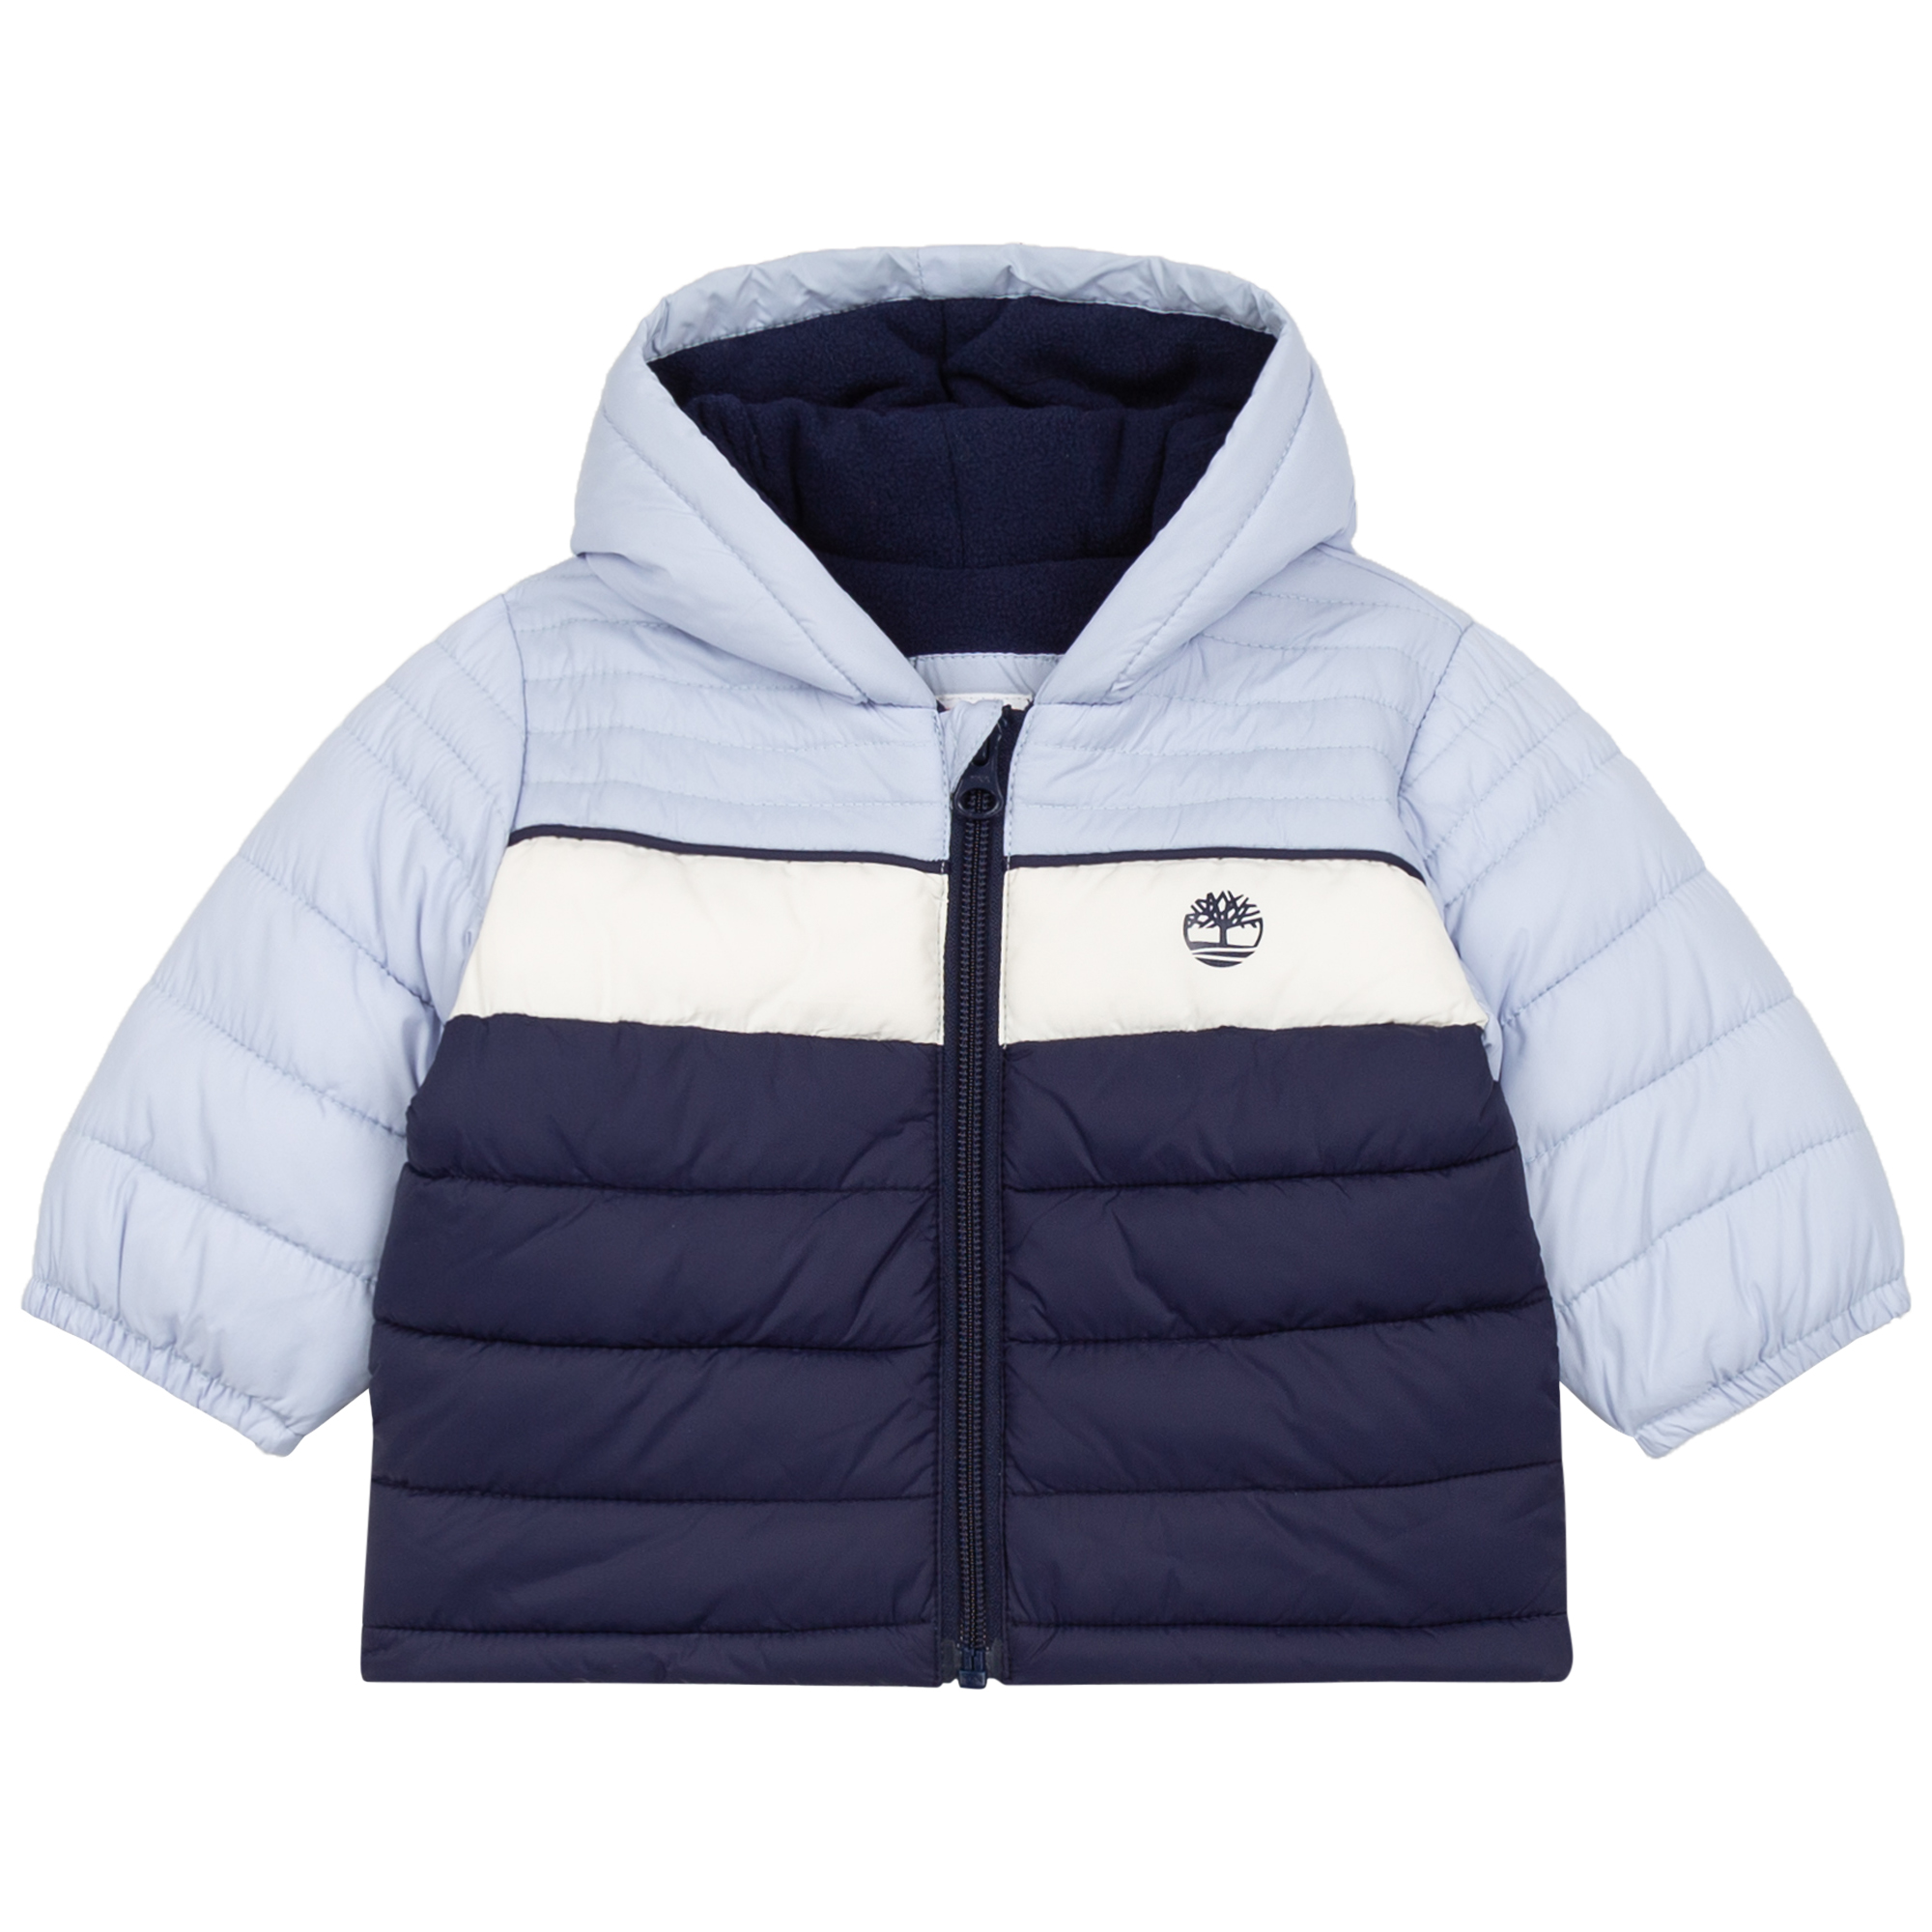 3-in-1 ski suit TIMBERLAND for BOY